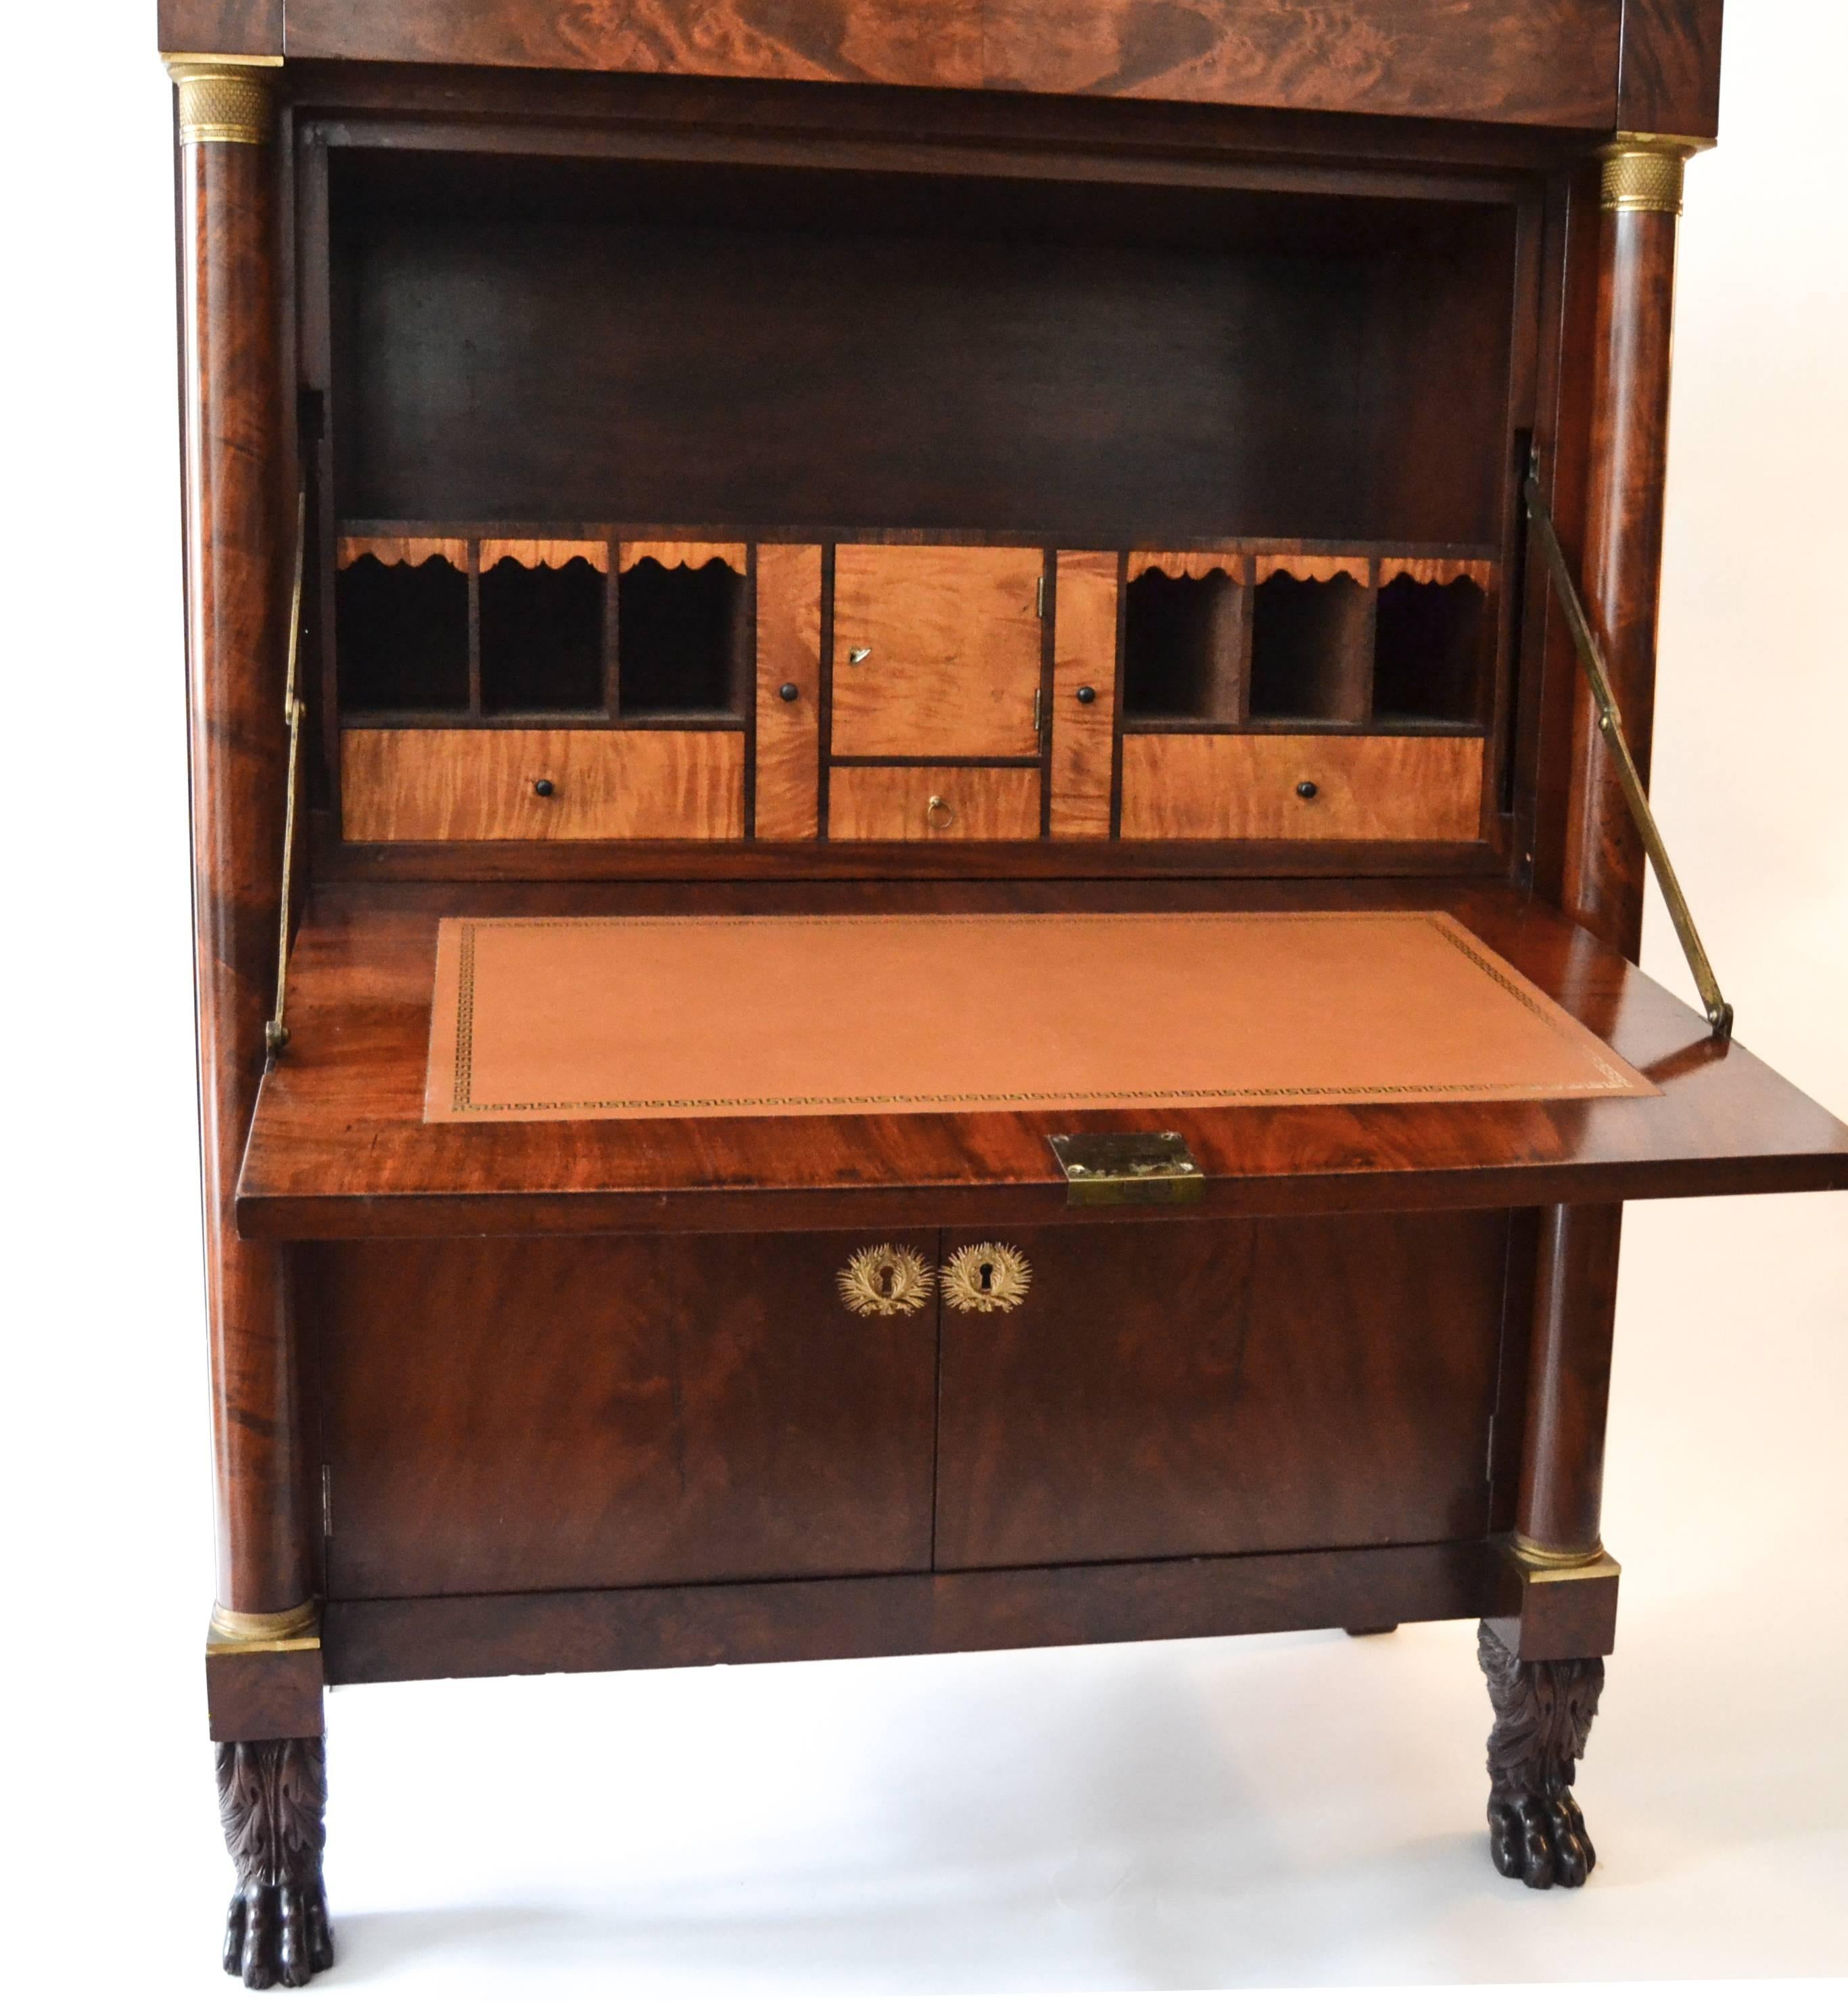 Fine New York classical secretary in the manner of Duncan Phyfe workshop. Finely carved solid mahogany paw feet, French ormolu, mahogany and satinwood veneers on interior drawer fronts. One interior drawer signed by owner (probably).